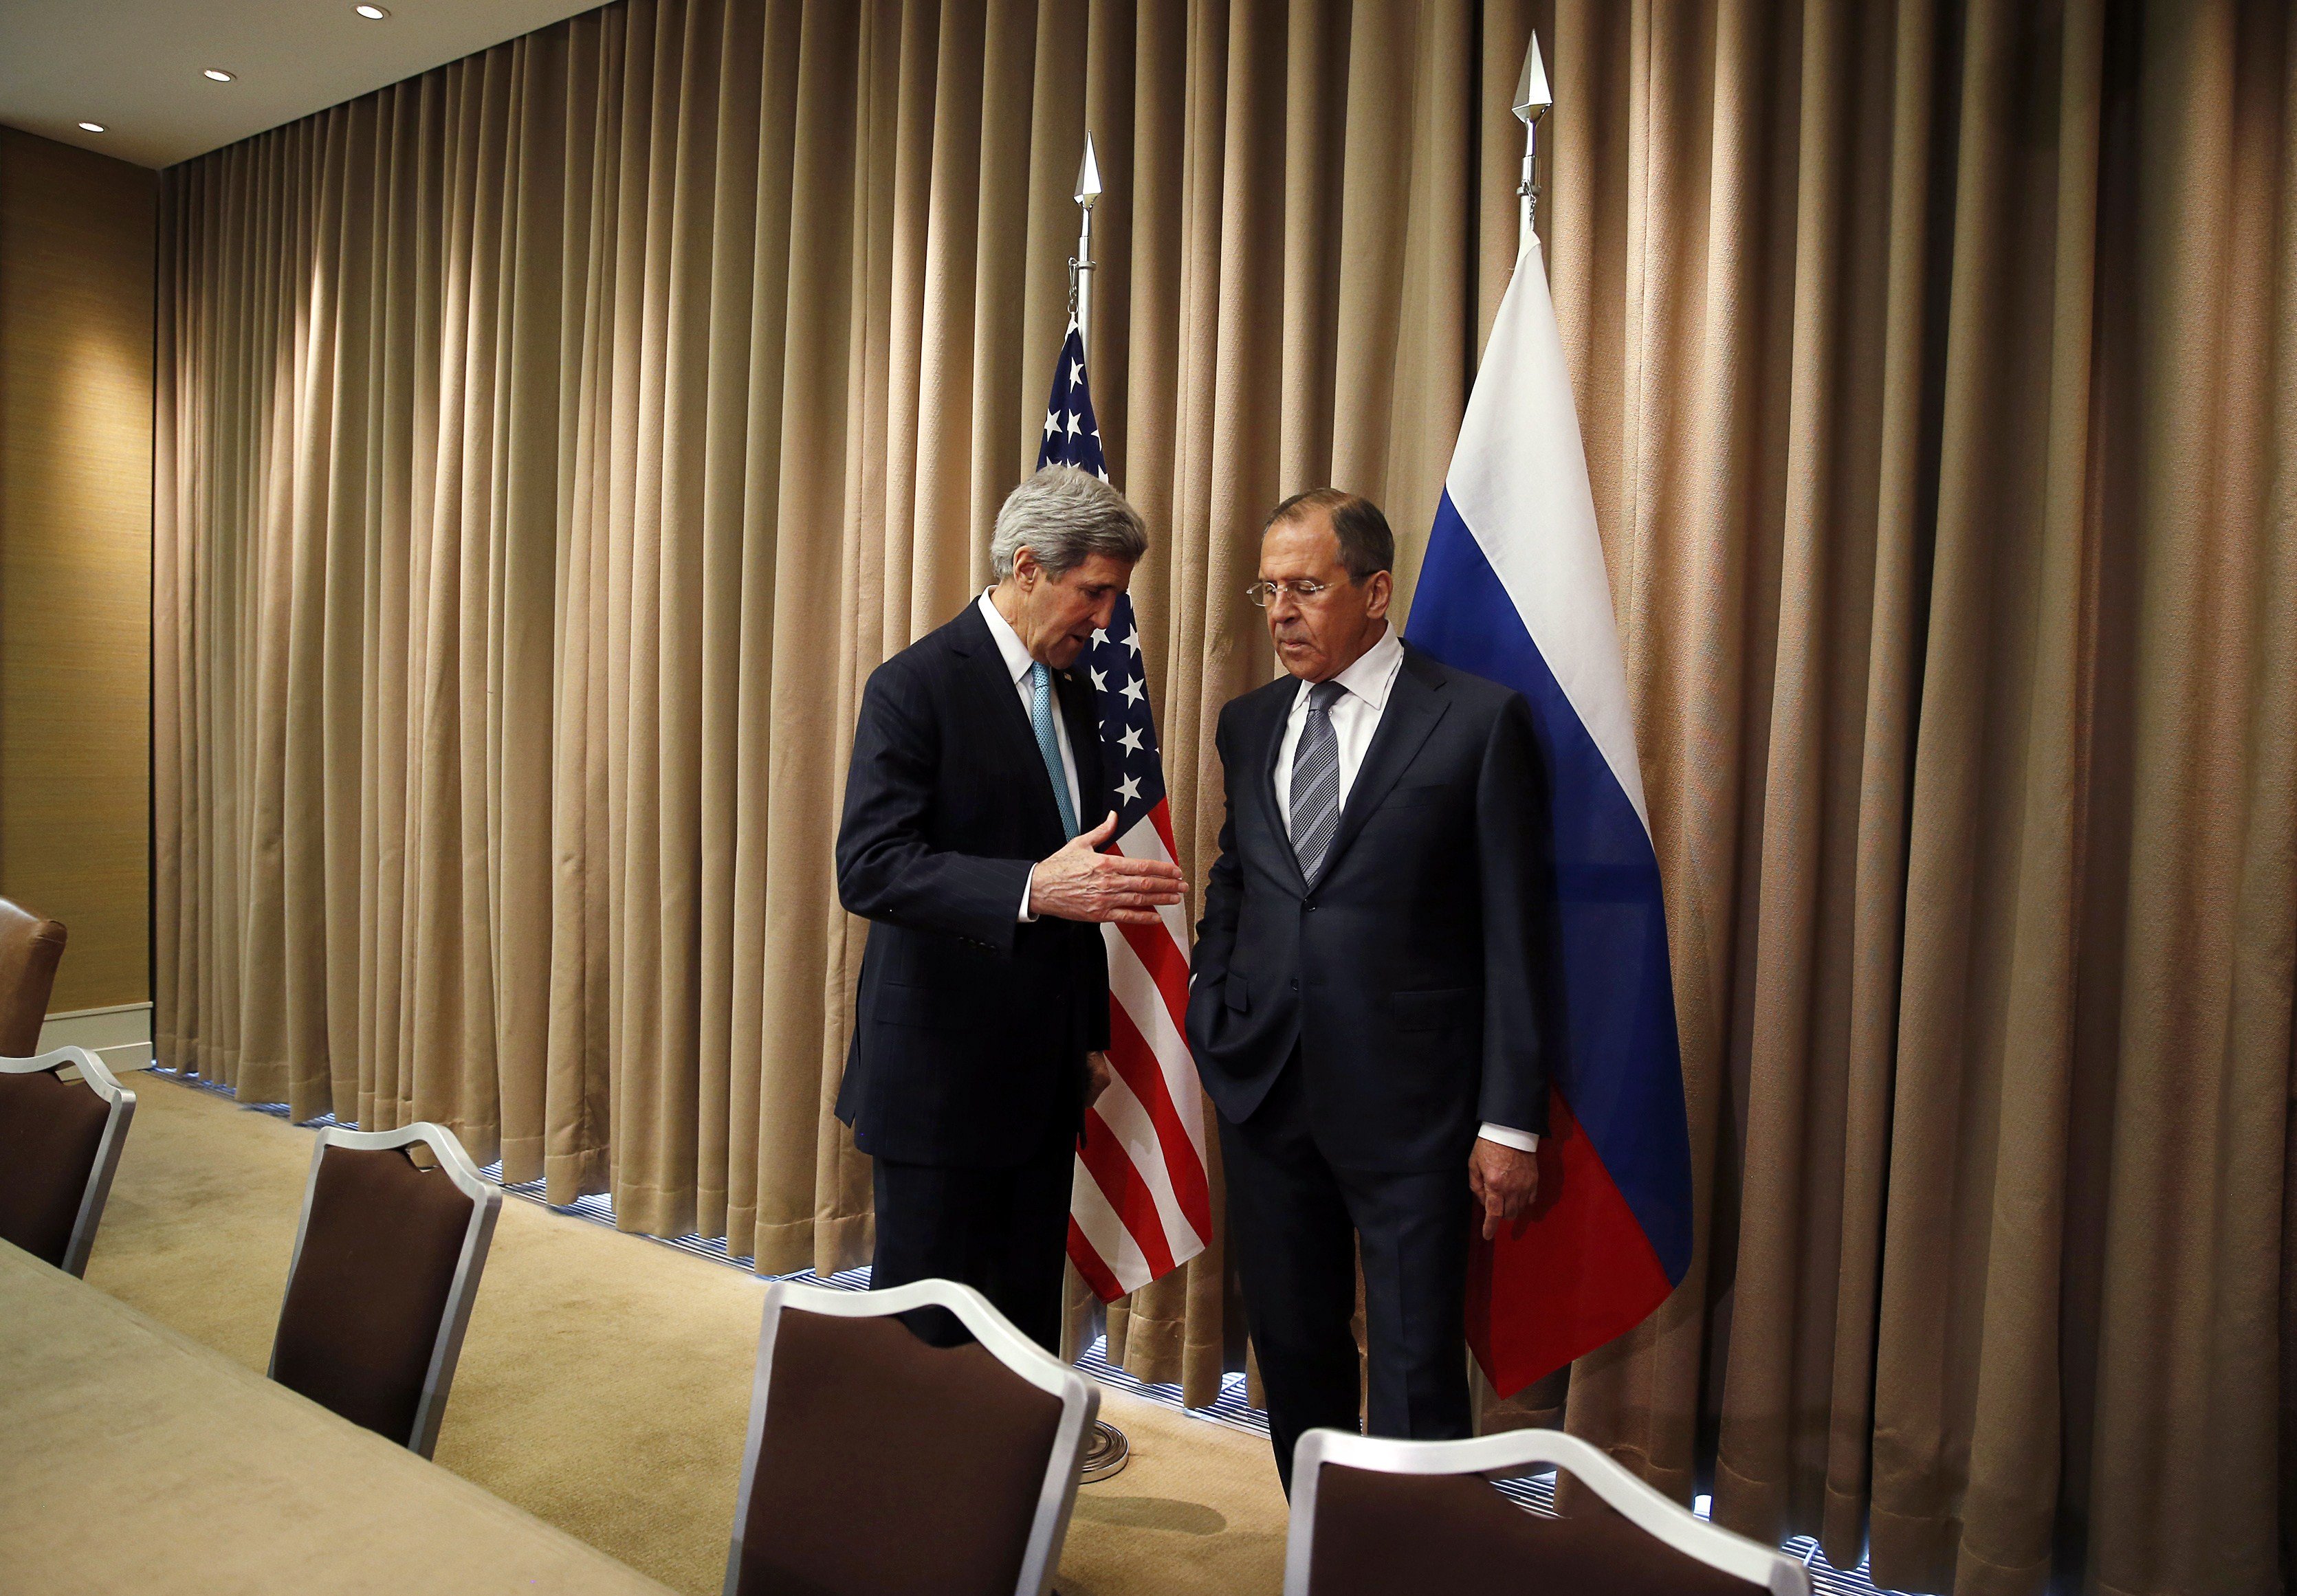 From left: U.S. Secretary of State John Kerry talks with Russian Foreign minister Sergei Lavrov at the start of a bilateral meeting to discuss the ongoing situation in Ukraine on April 17, 2014 in Geneva. (Jim Bourg—AFP/Getty Images)